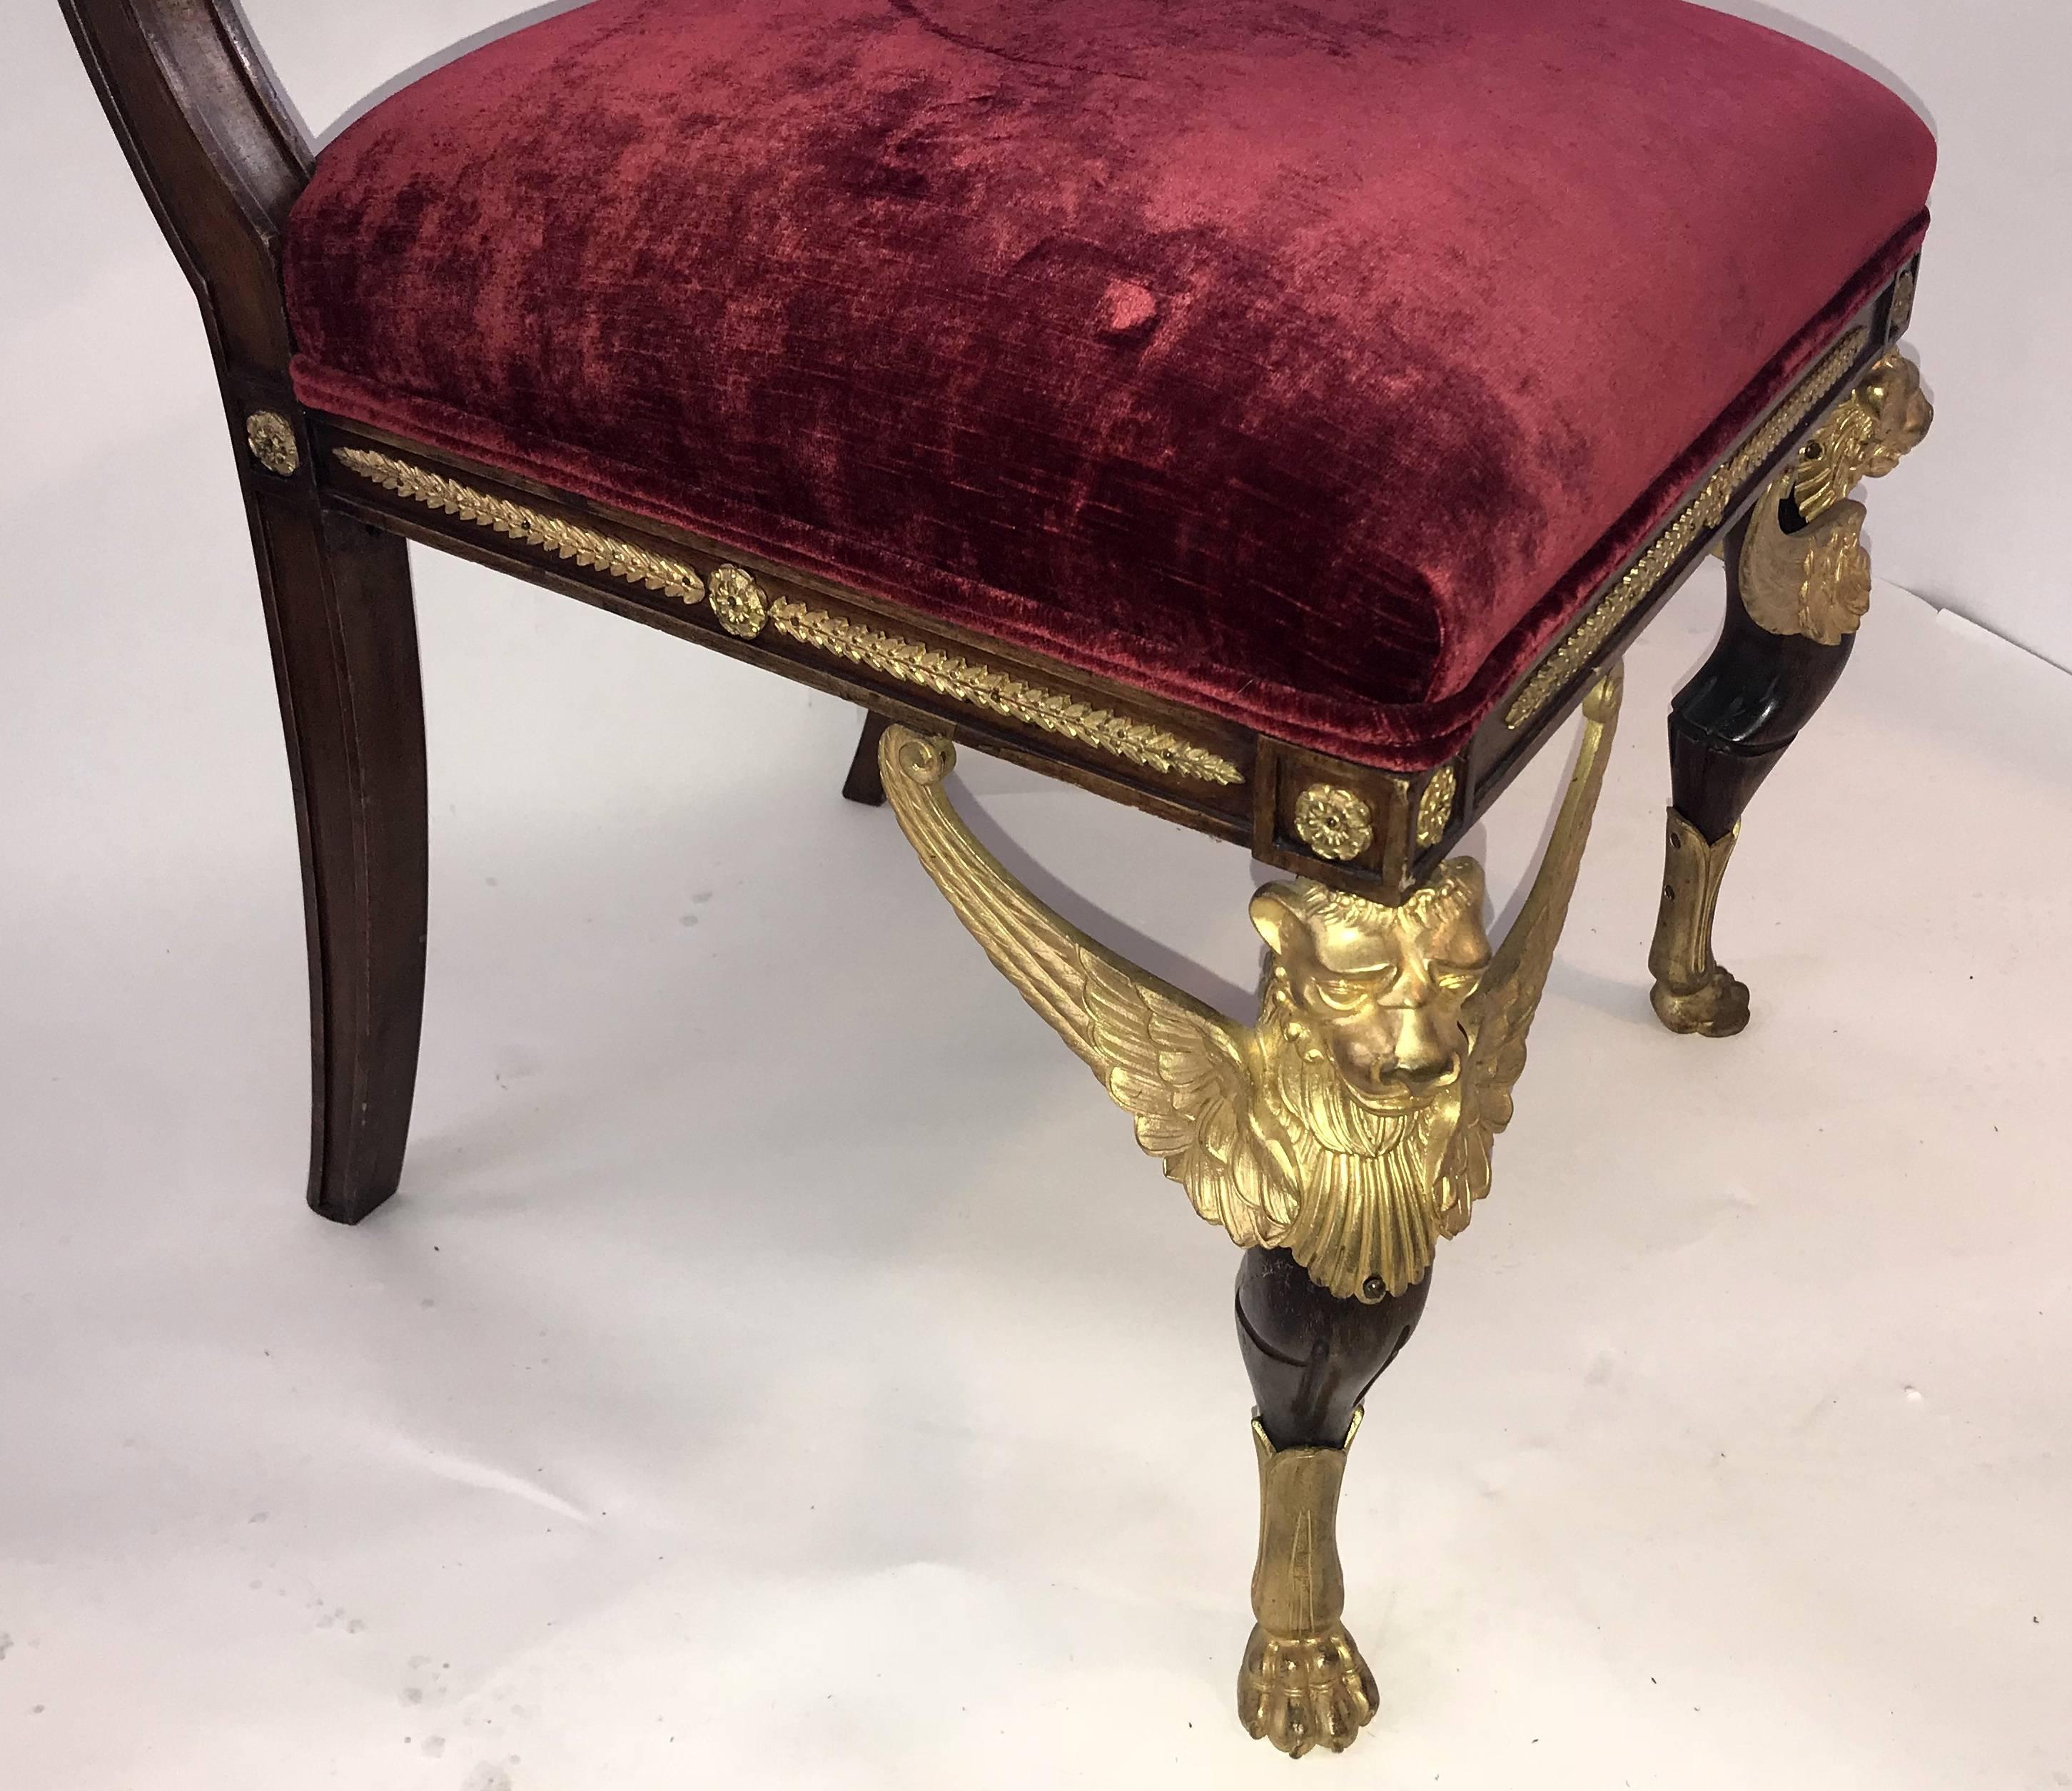 Early 20th Century Pair of French Empire Winged Lion Gilt Bronze Ormolu-Mounted Side Chairs